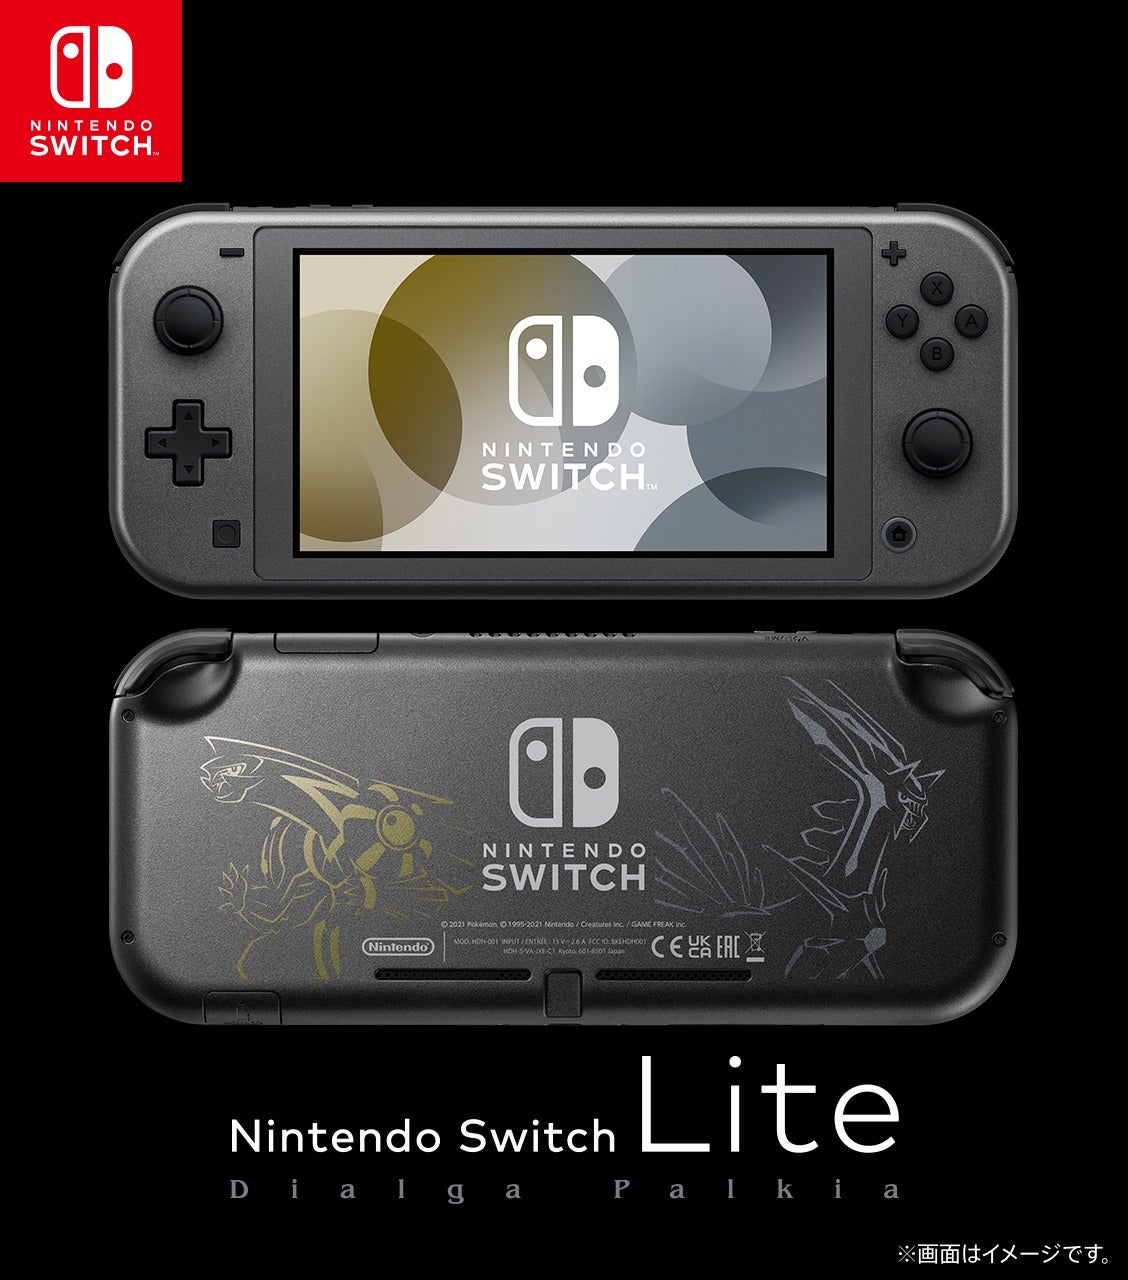 A closer look at the new Pokémon themed Nintendo Switch Lite.  (Image: Nintendo)